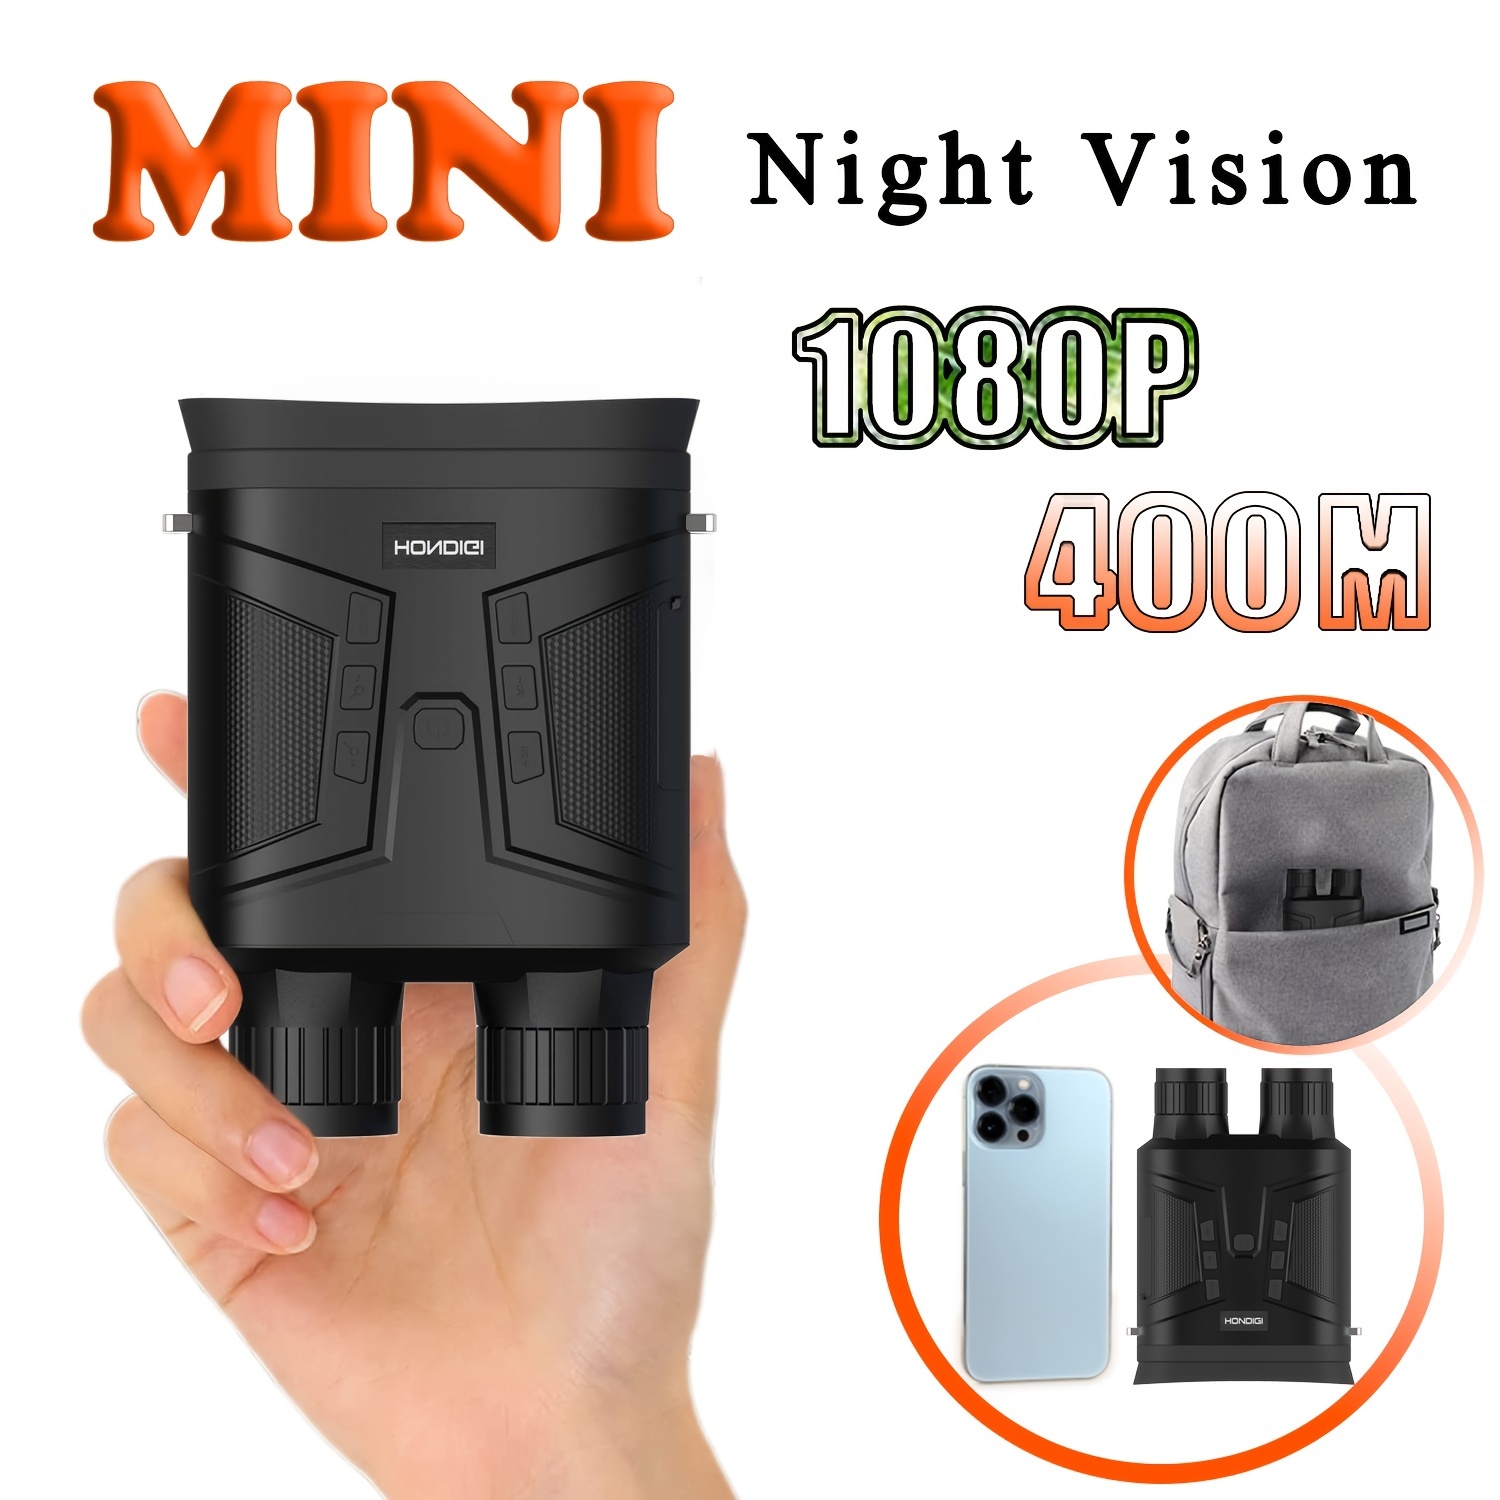 CREATIVE XP Digital Night Vision Binoculars for Complete Darkness -  GlassCondor Pro Infrared Night Vision Goggles for Hunting, Spy and  Surveillance Black 